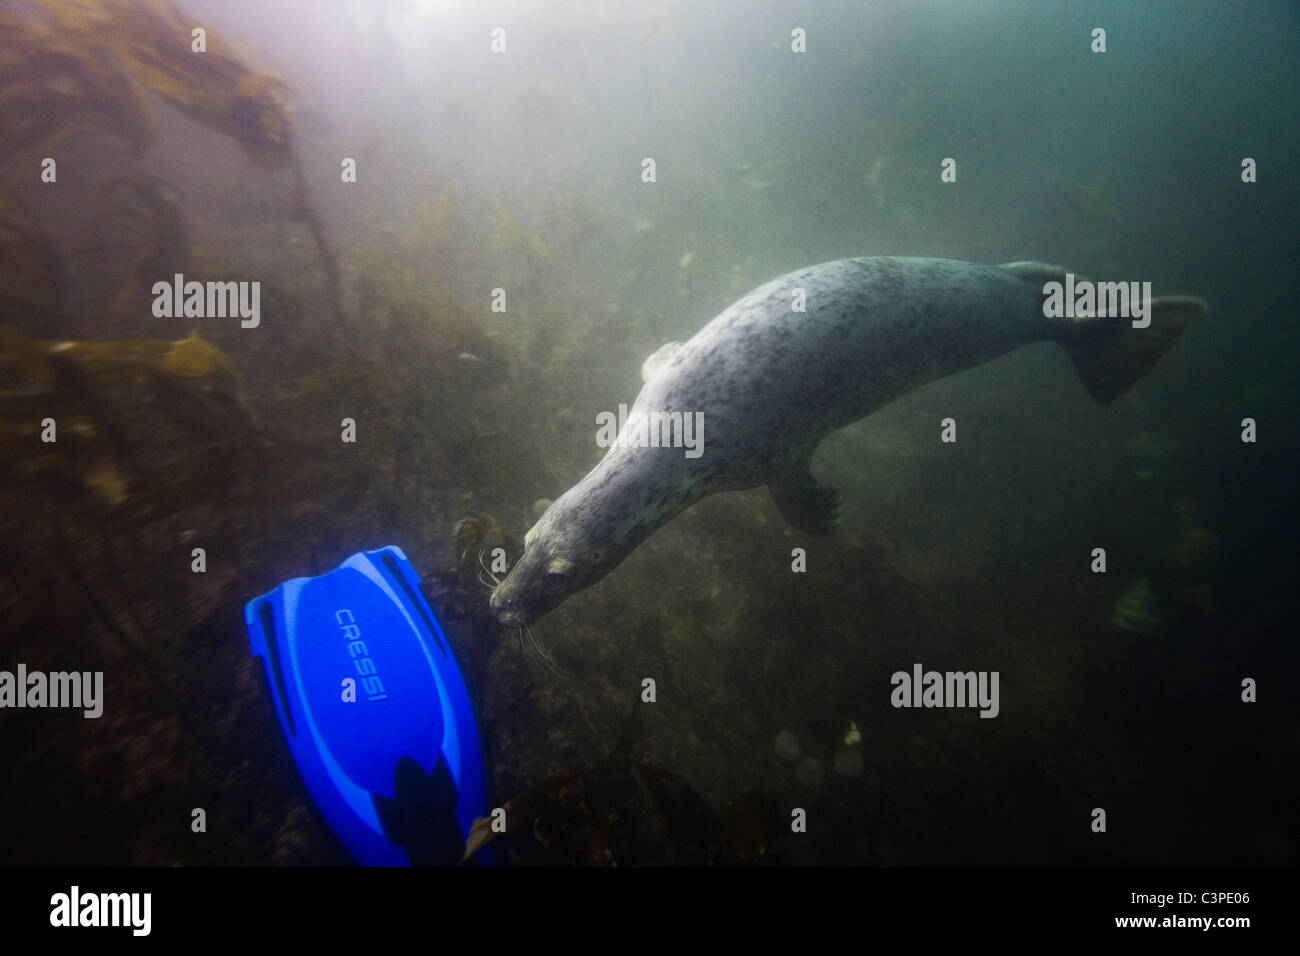 A playful grey seal chases after the fin of a scuba diver in the waters of Farne Islands, off the coast of Northumberland. Stock Photo